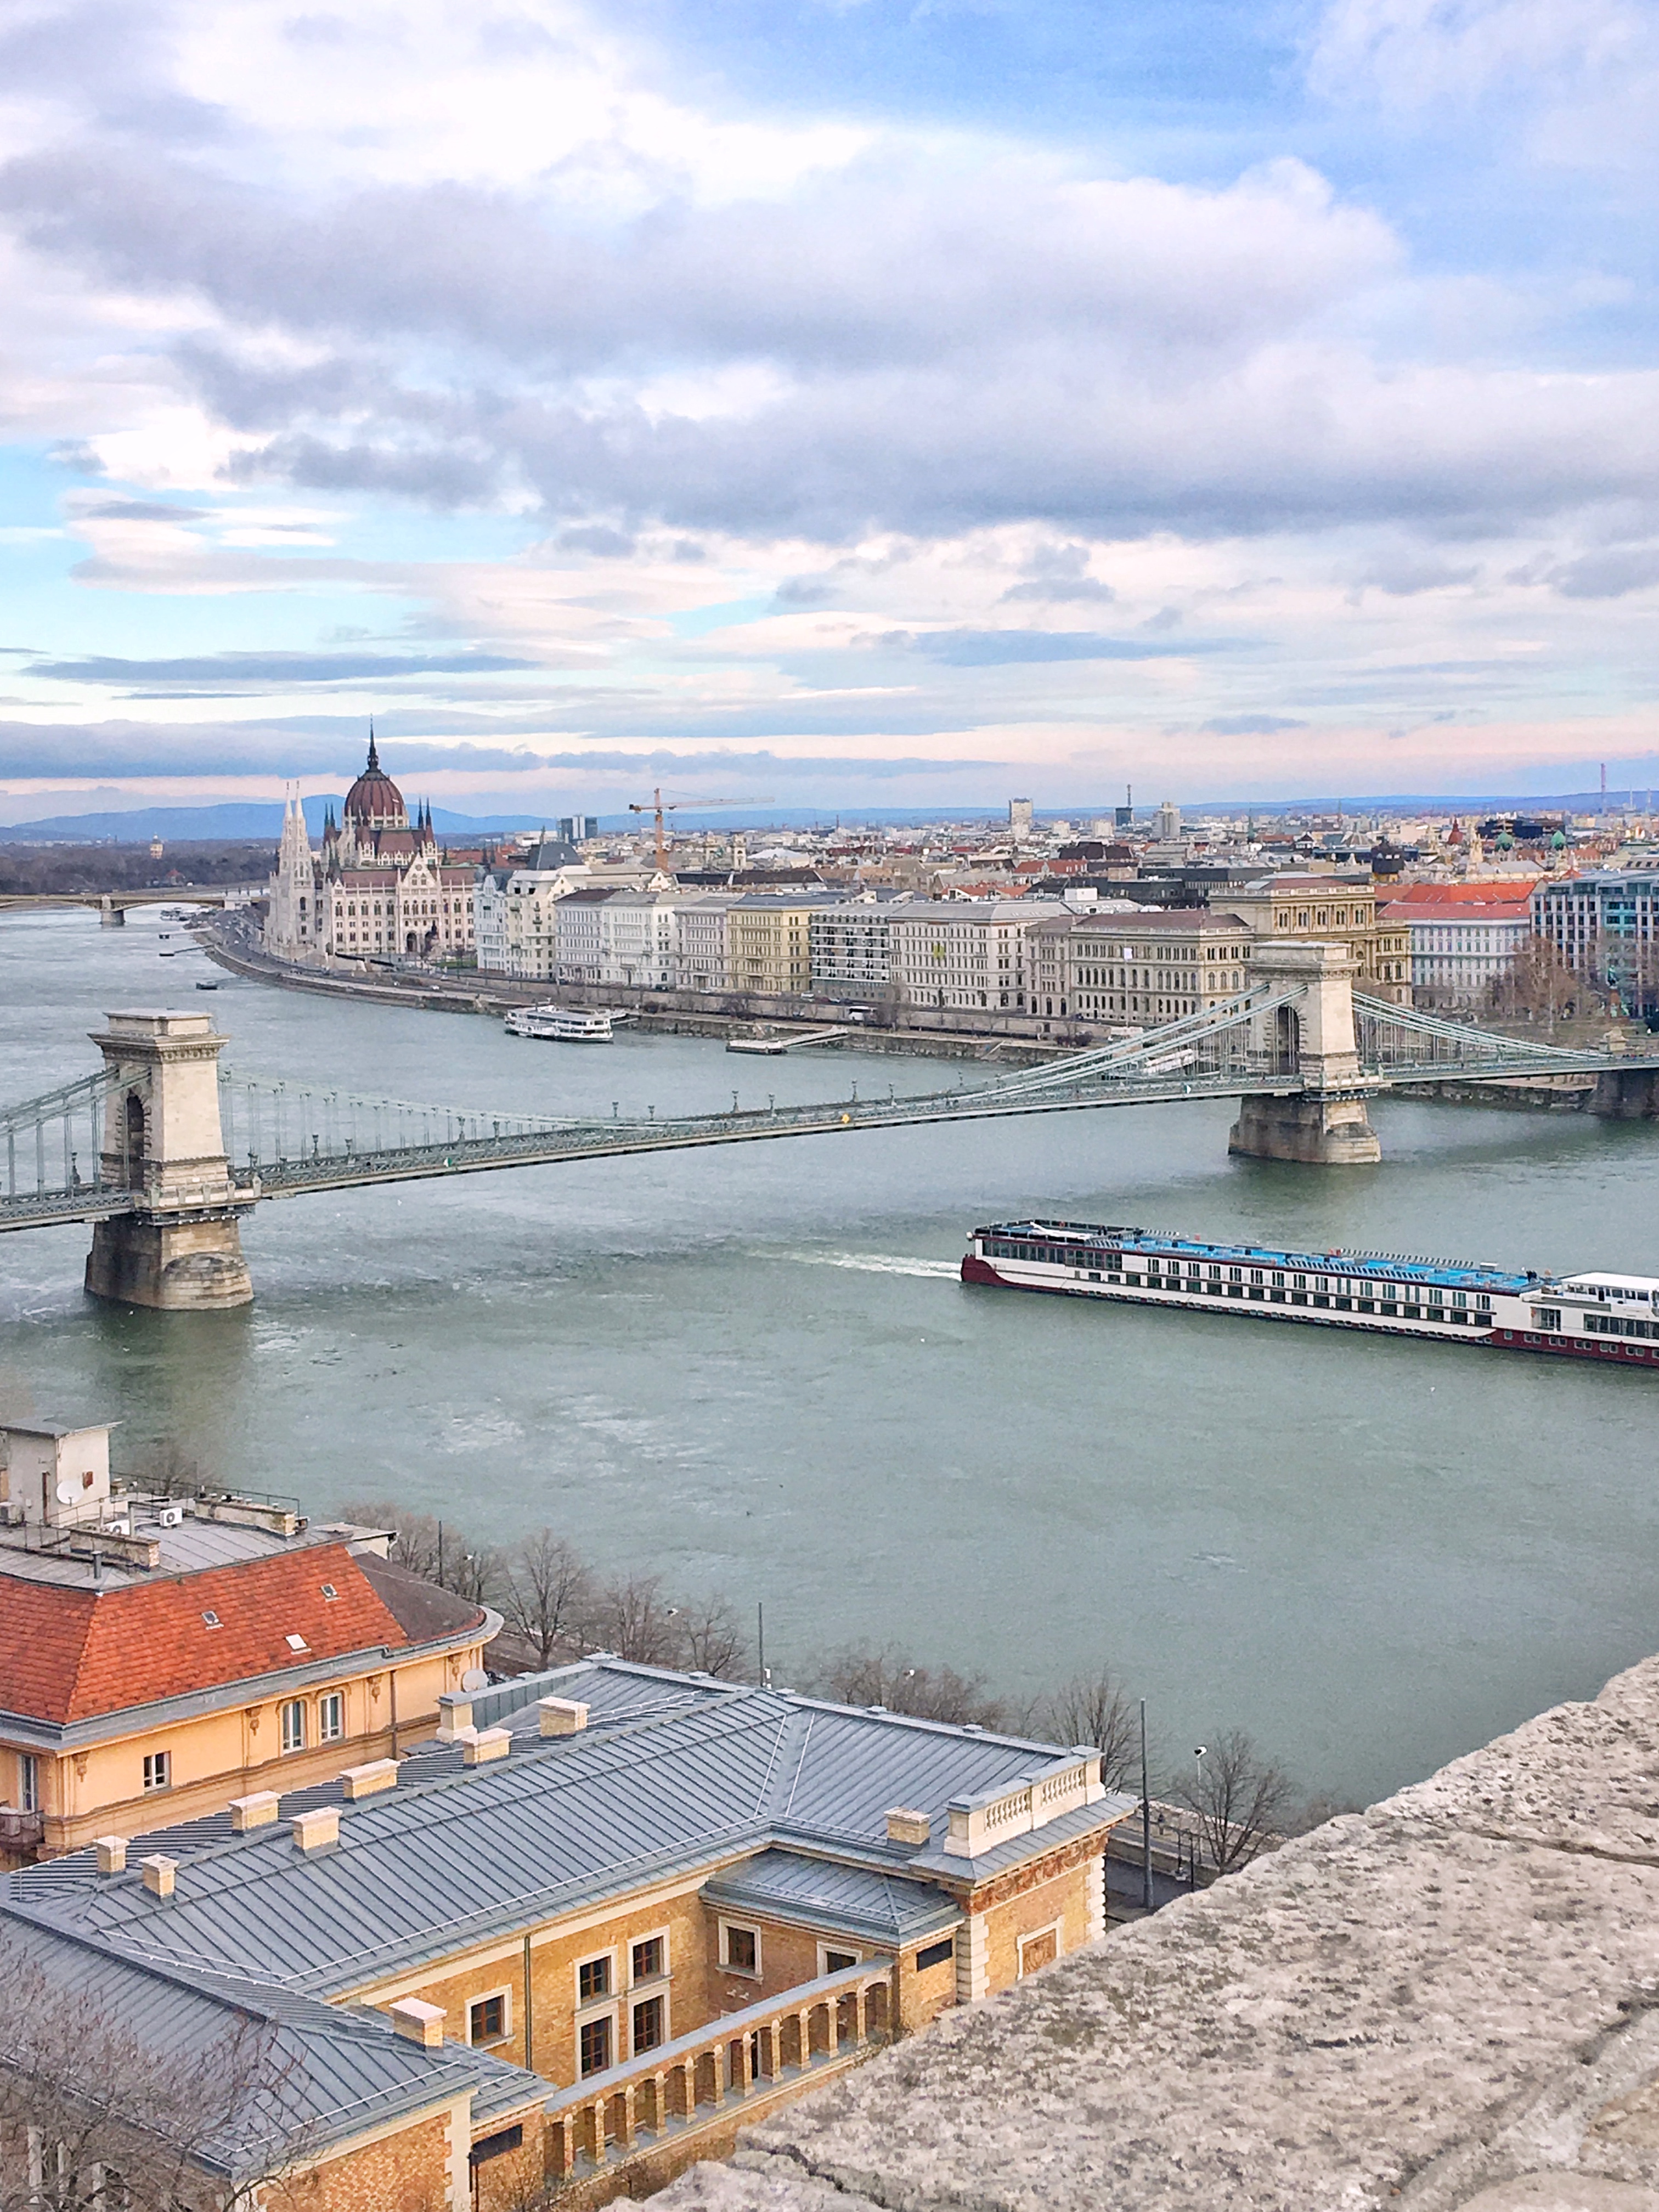 Sweeping views from Buda castle hill